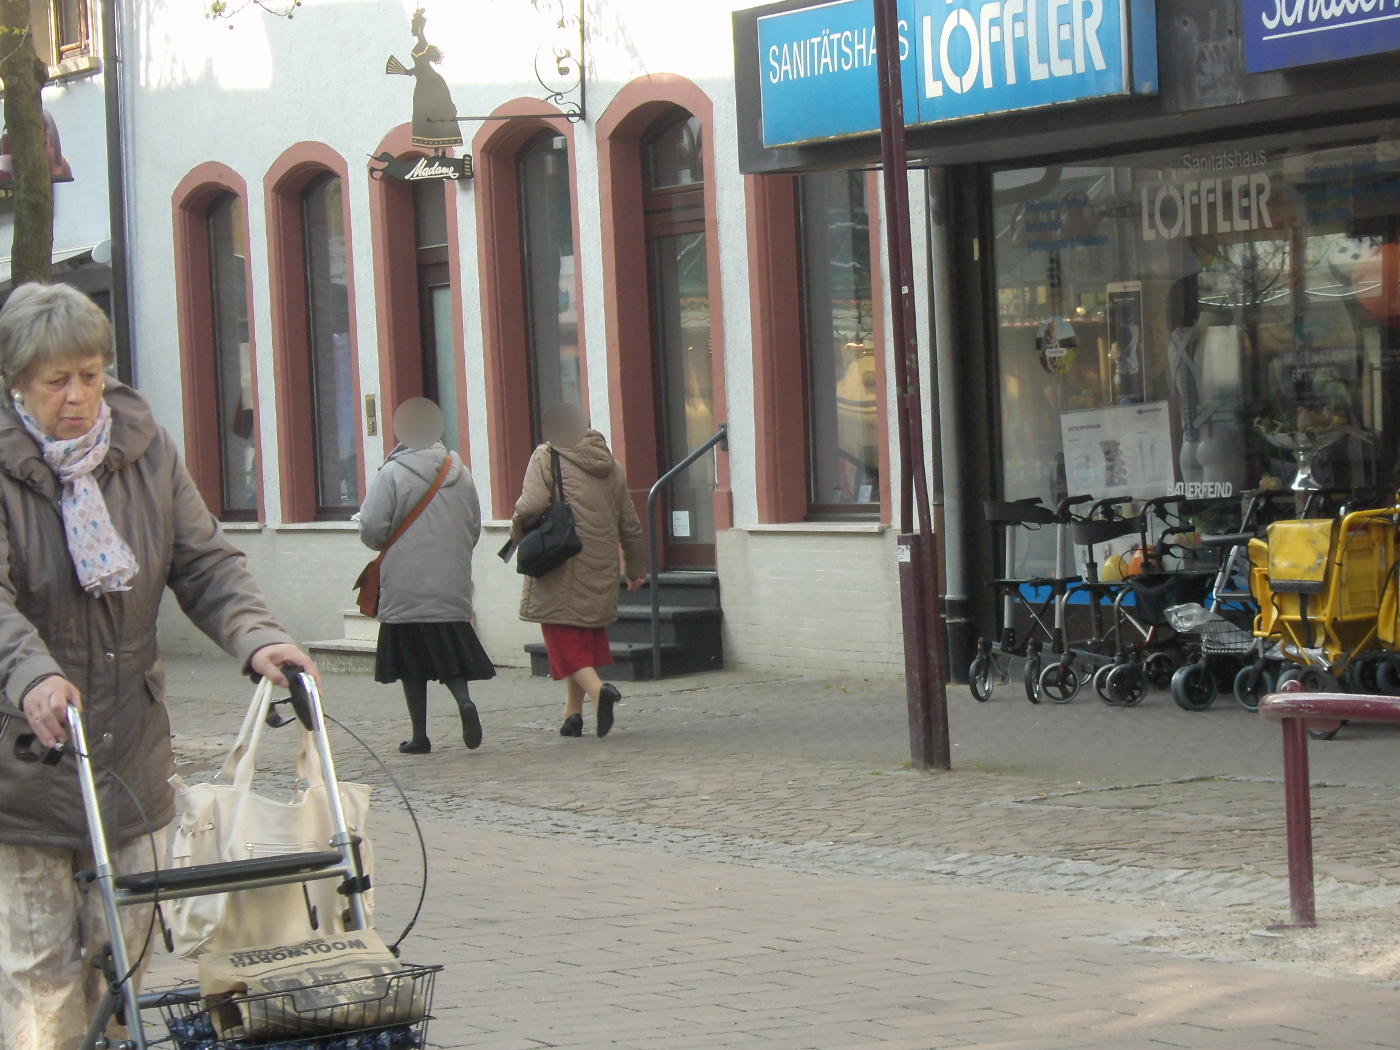 Wiesloch: Jehovah's Witness stronghold? Saturdays never.